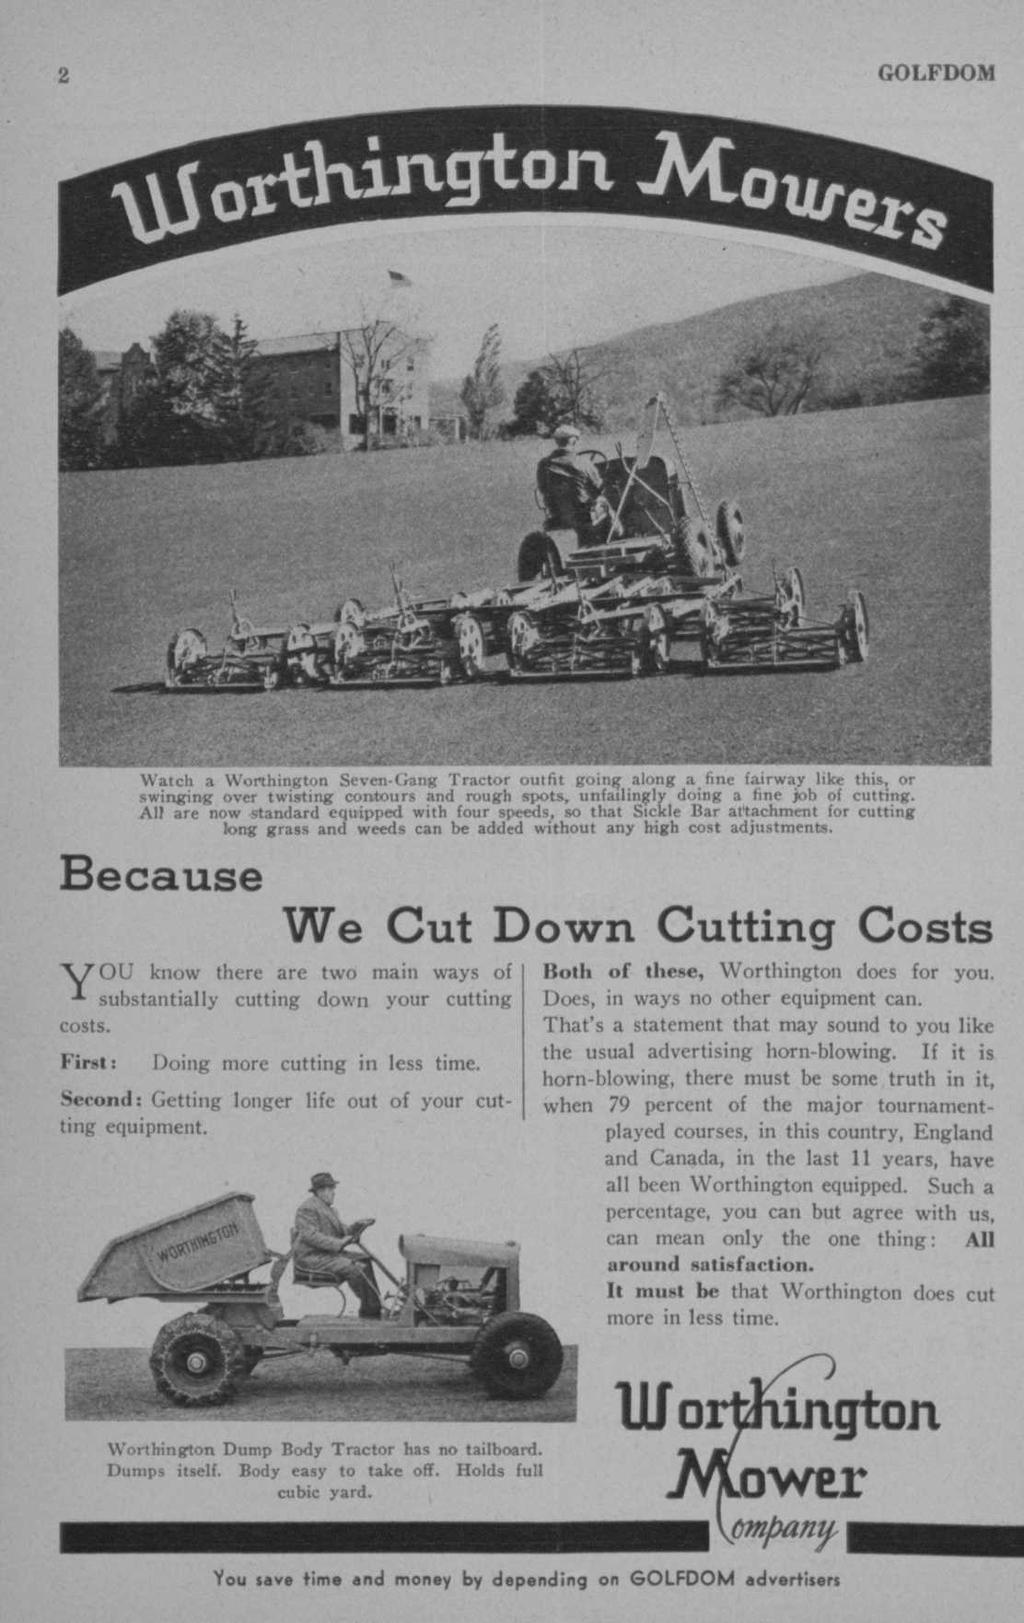 Watch a Worthington Seven-Gang Tractor outfit going along a fine fairway like this, or swinging over twisting contours and rough spots, unfailingly doing a fine jk>b of cutting.